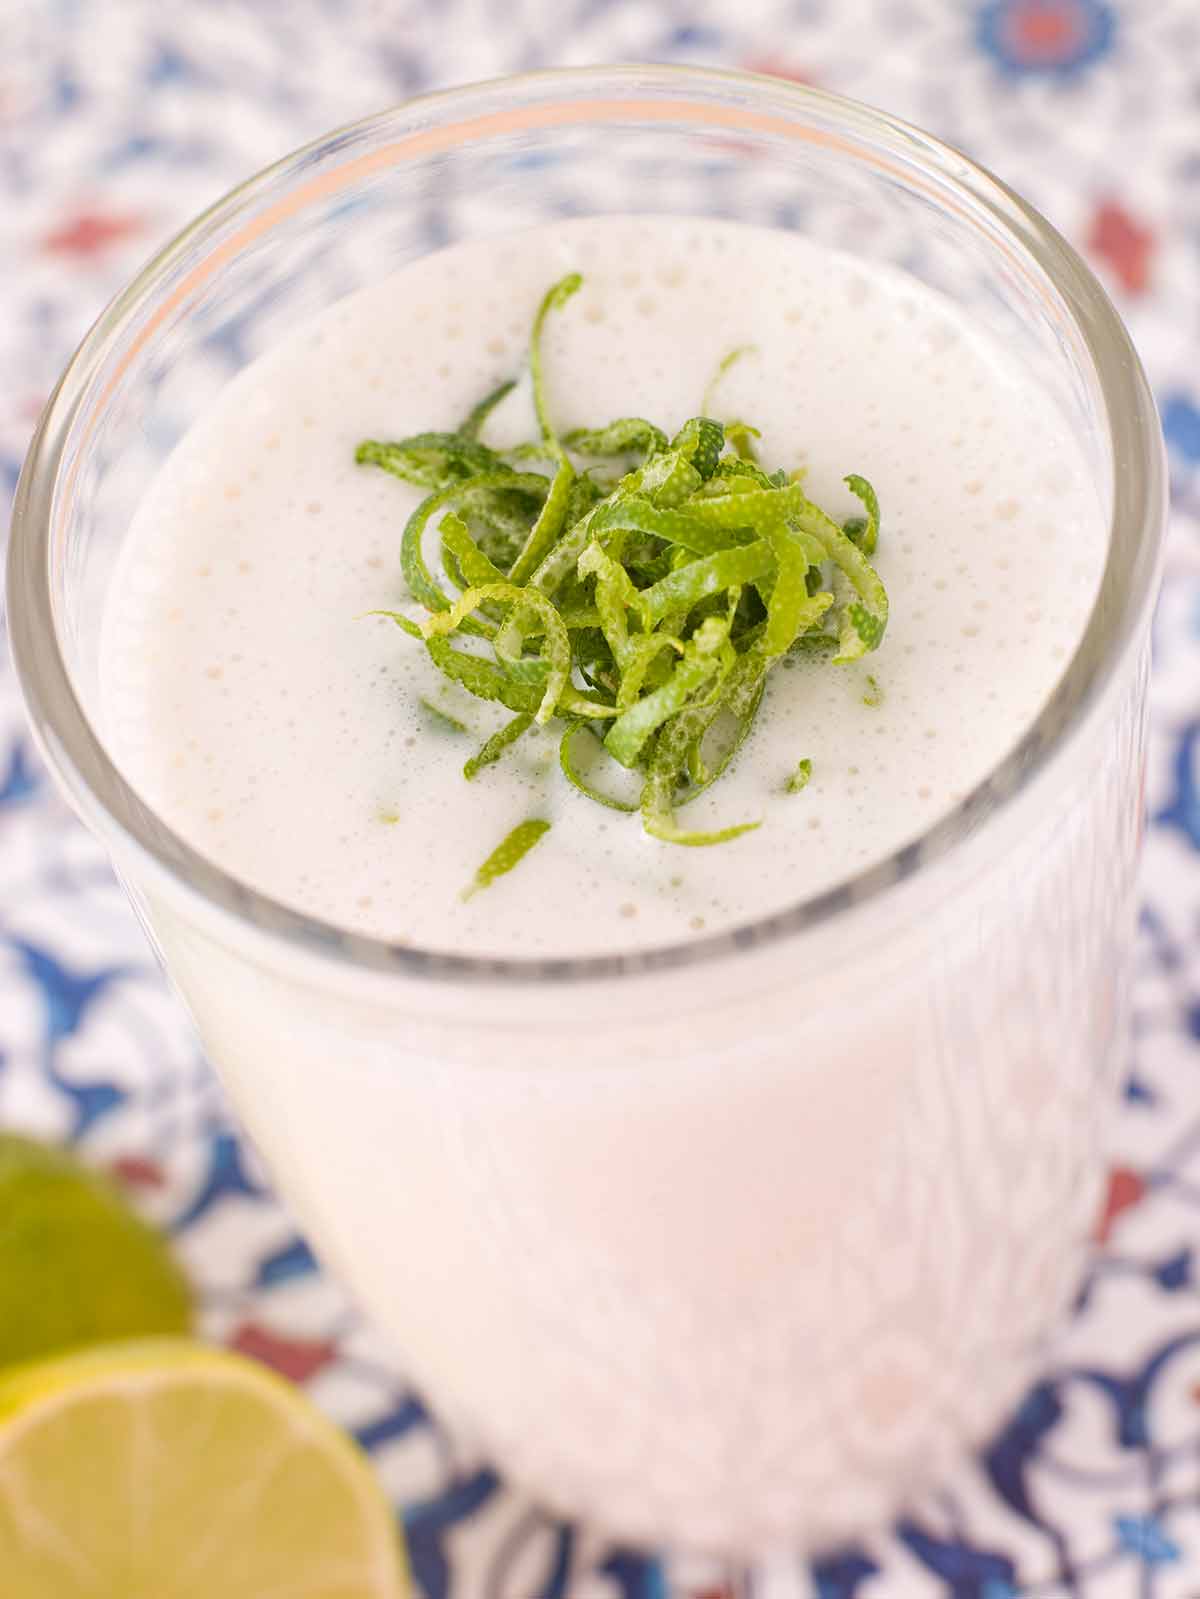 Spanish drinks horchata with lime rinds